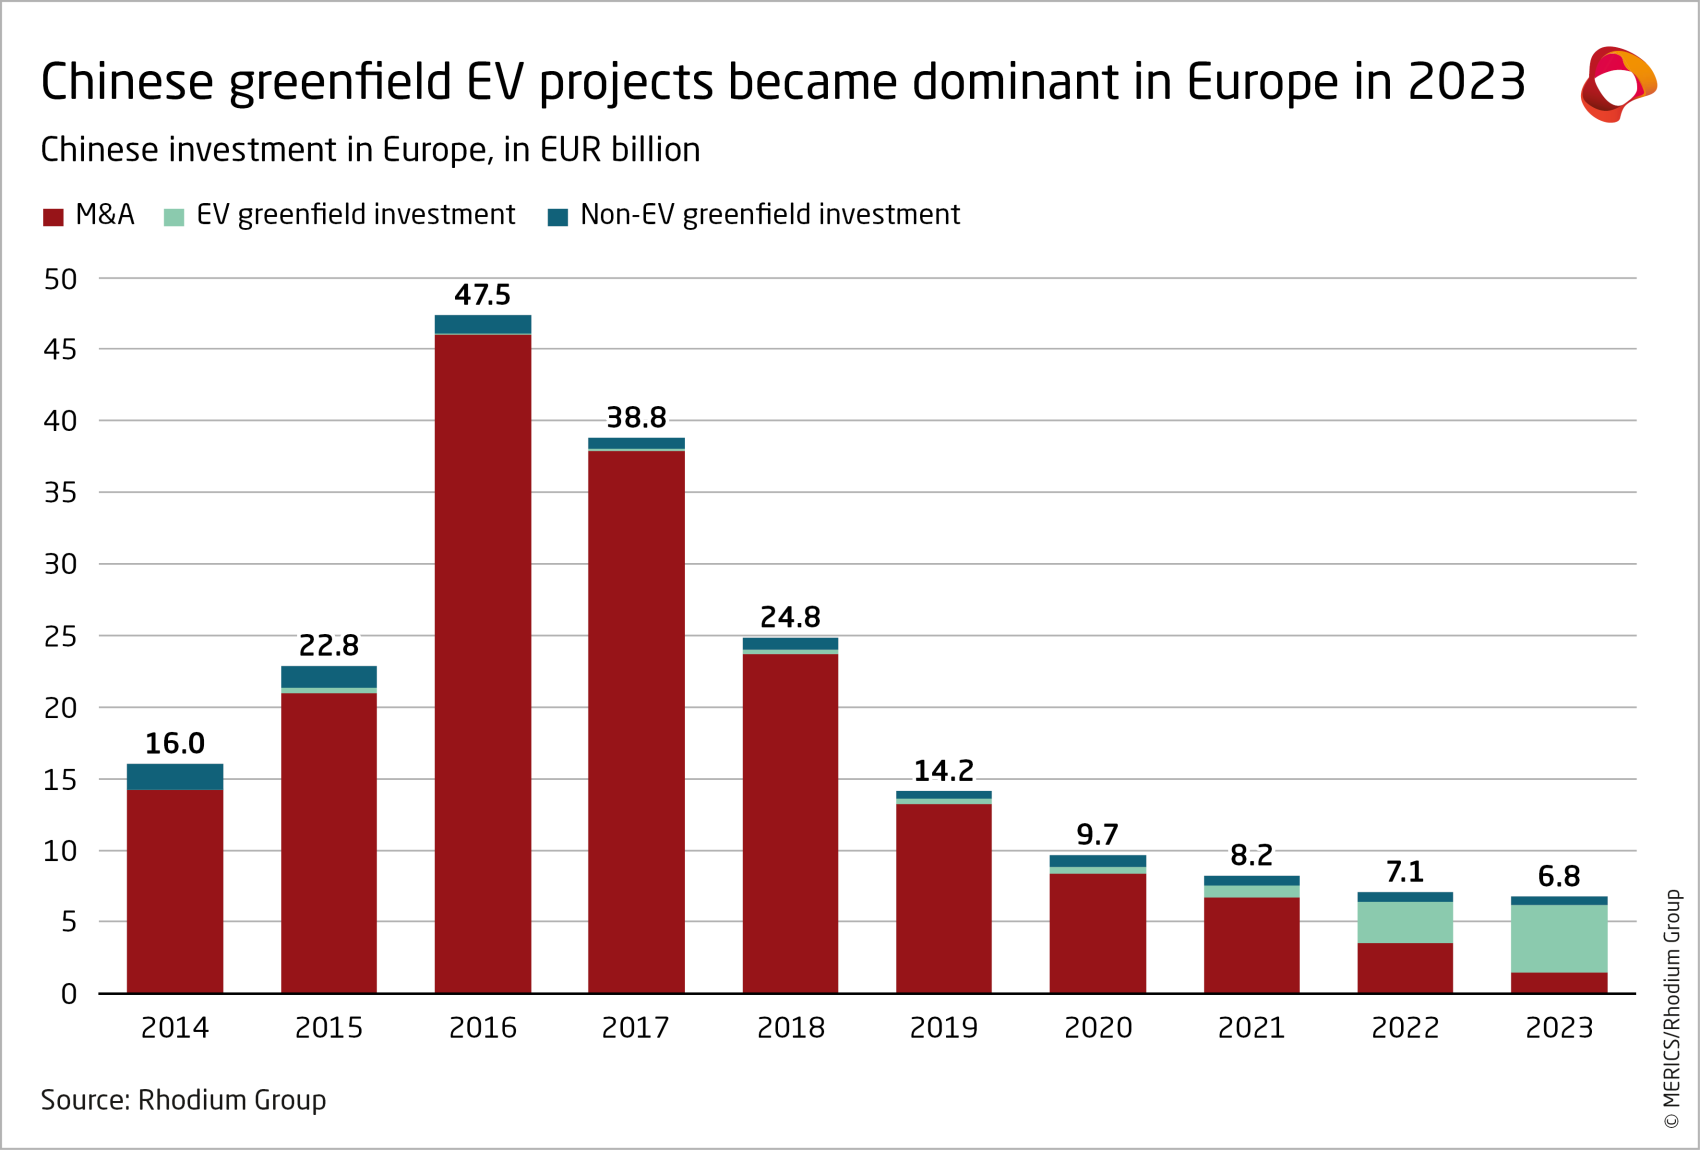 merics-rhodium-group-chinese-fdi-in-europe-2023-chinese greenfield-ev-projects-dominant-exhibit-1.png